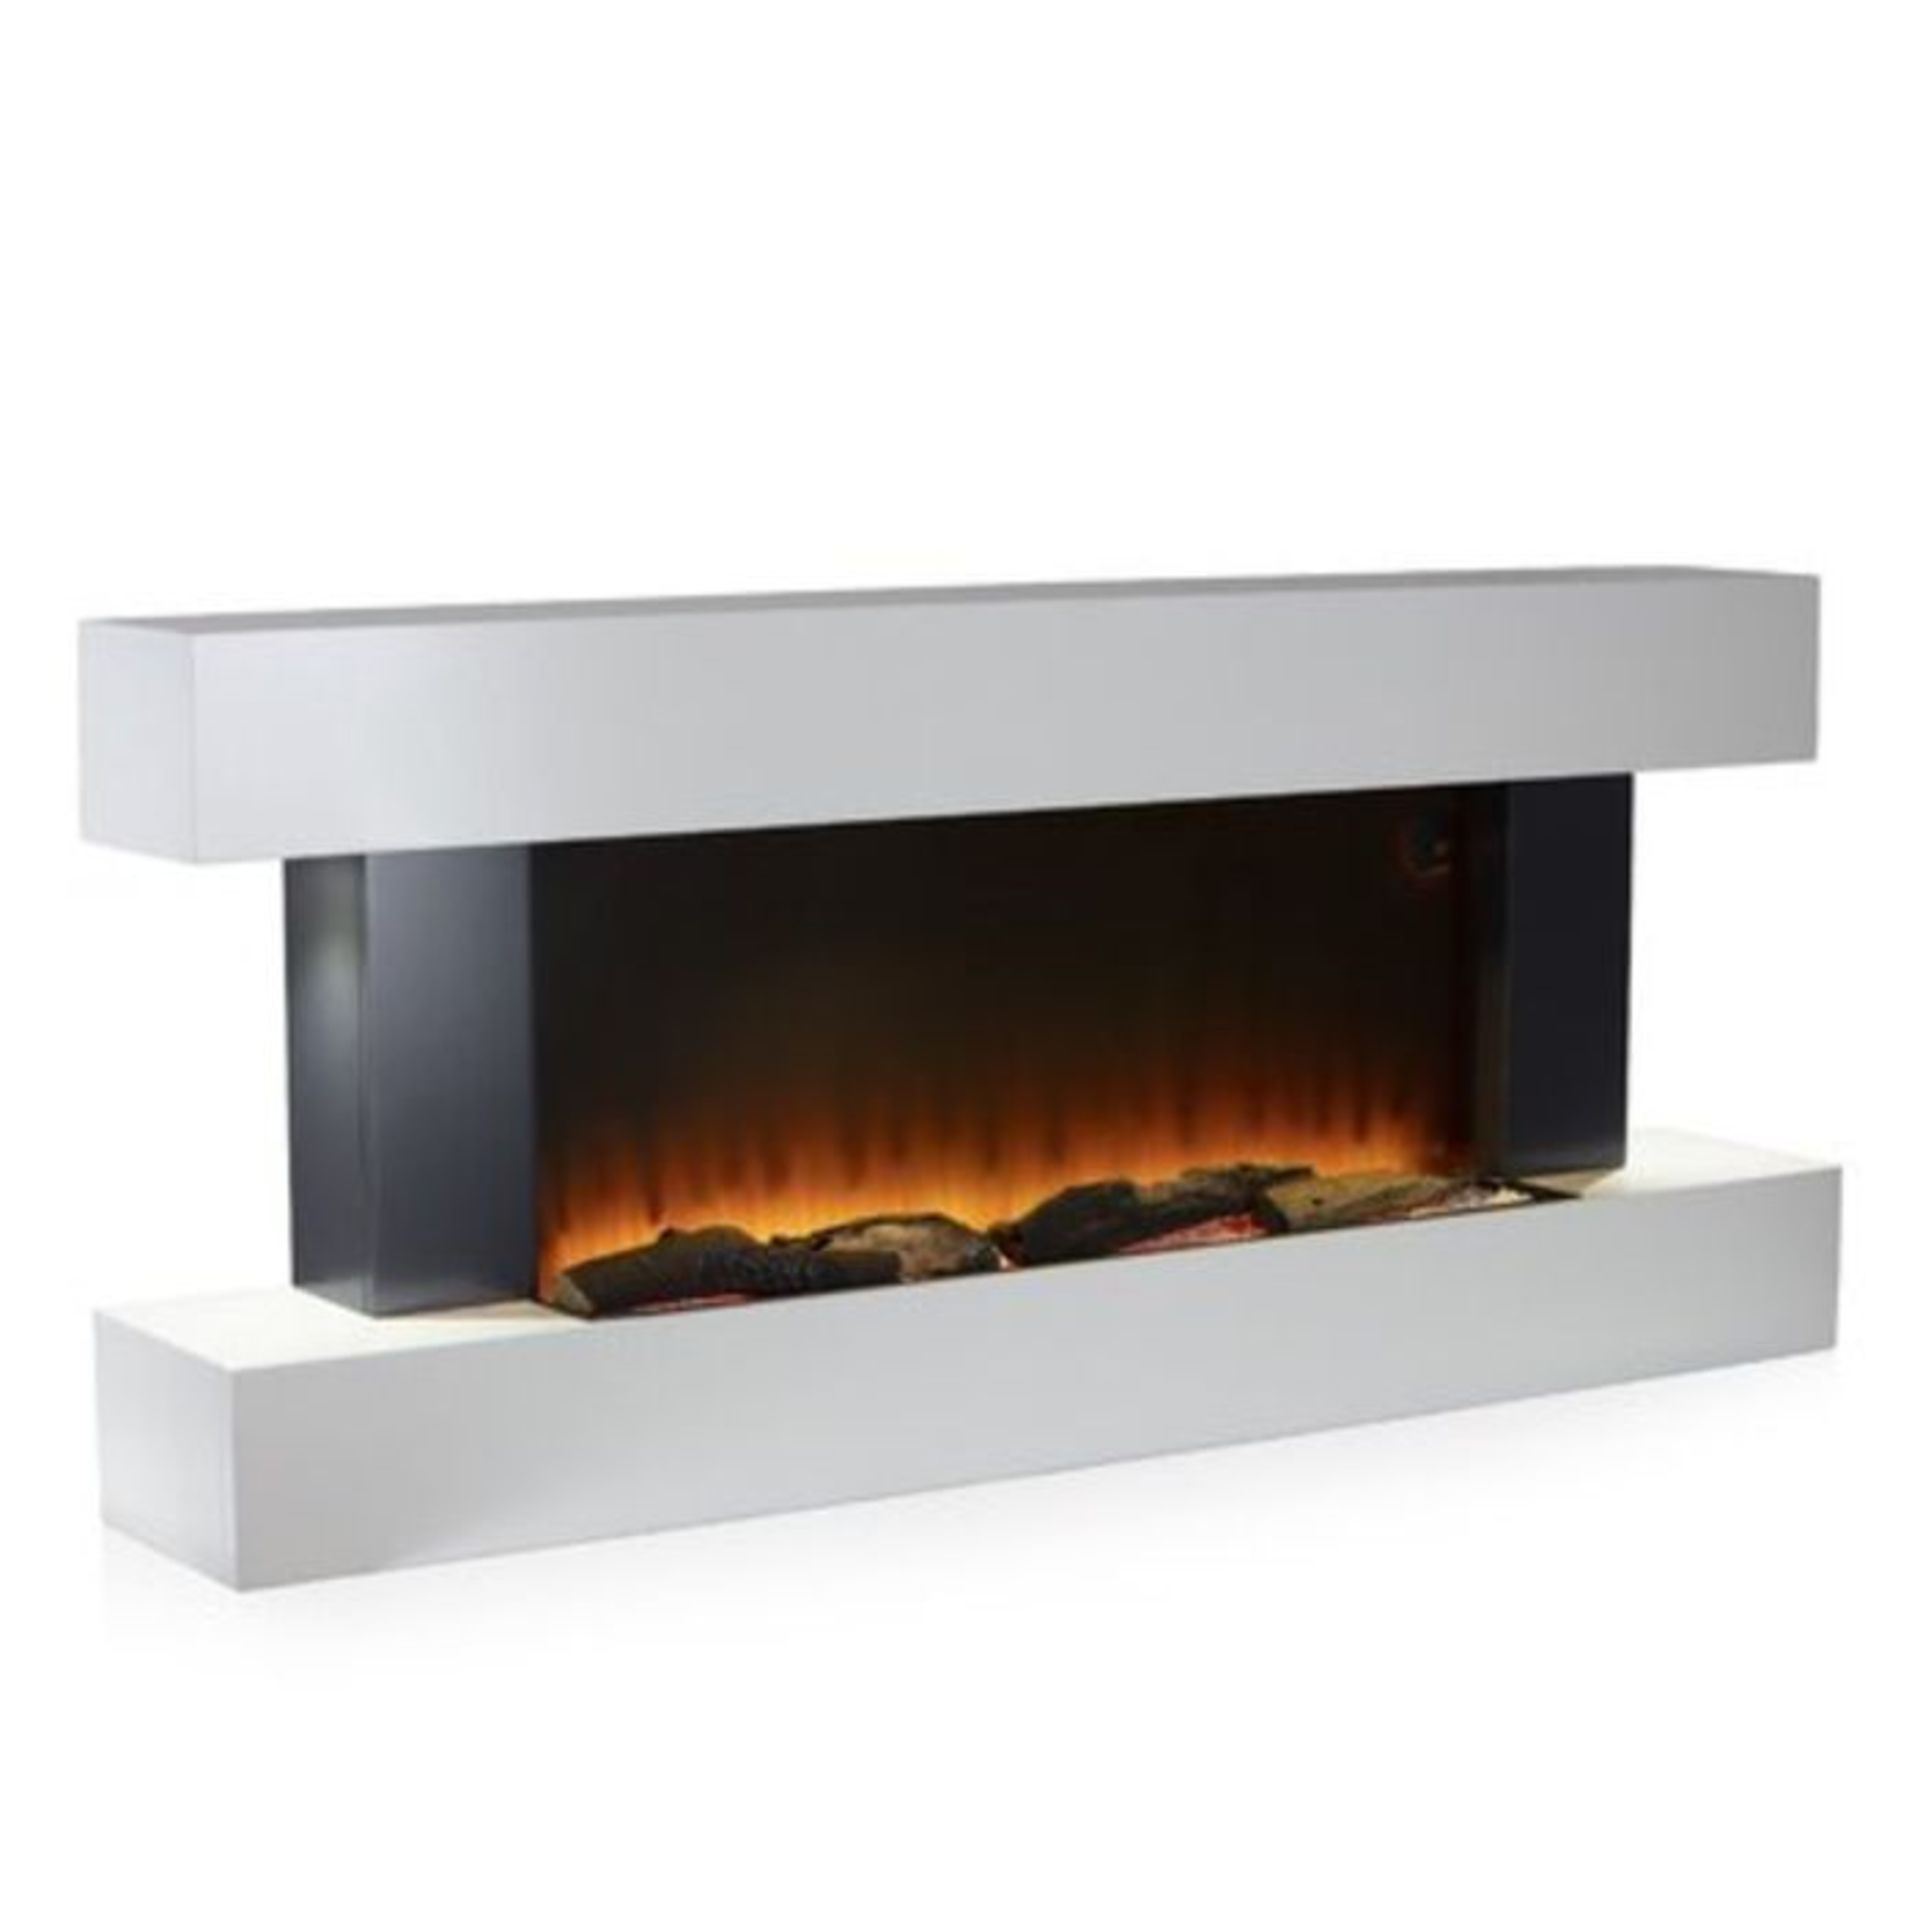 Warmlite,Warmlite Hingham Wall Mounted Electric Fire RRP -£499.96 (25535/7 -XDNV1013)(BOXED RETURN